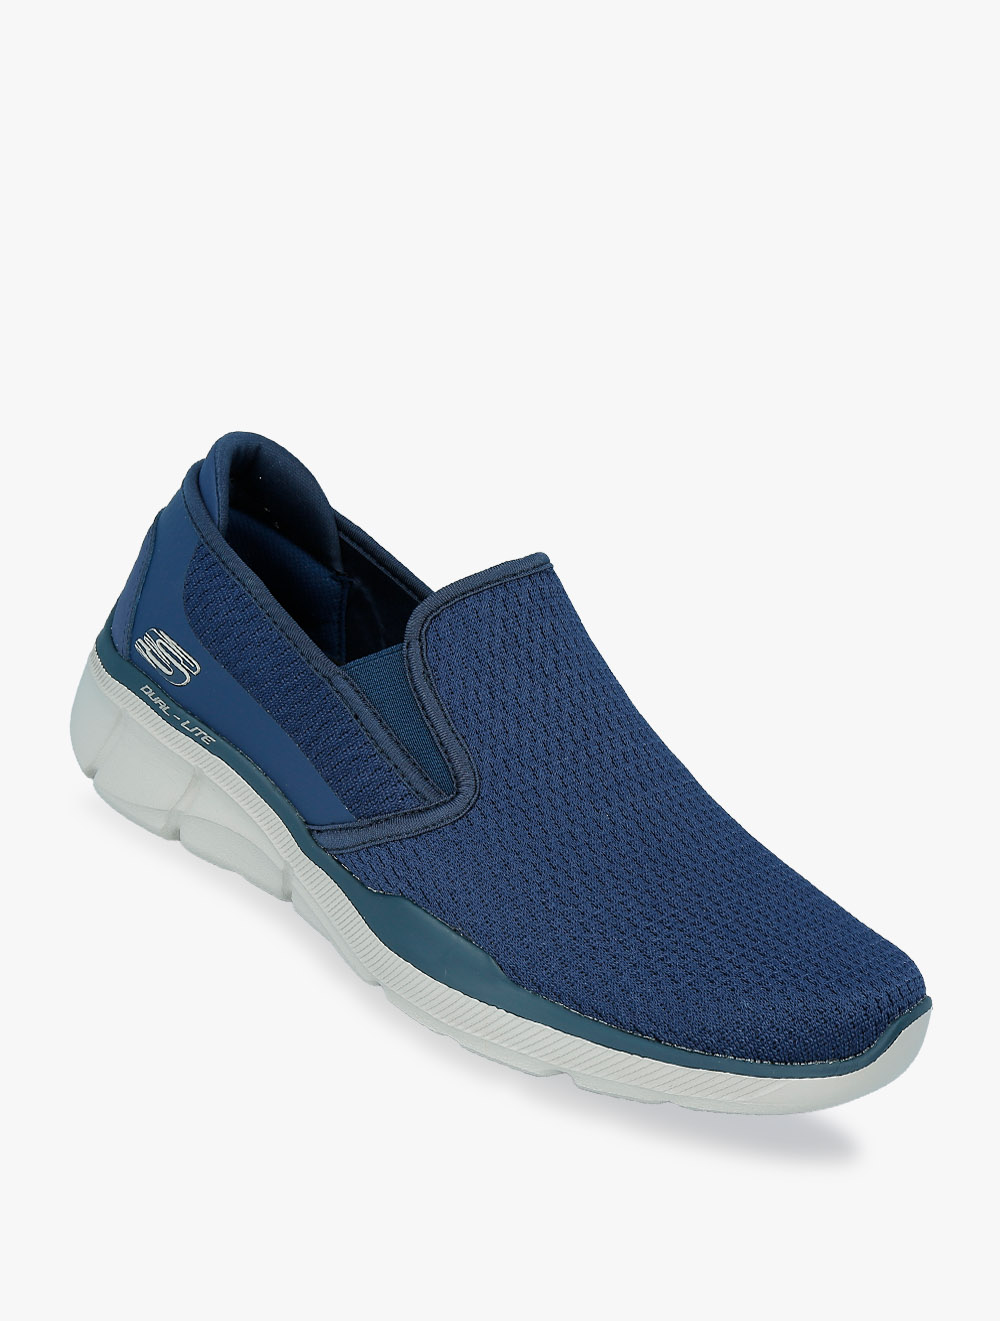 skechers childrens shoes